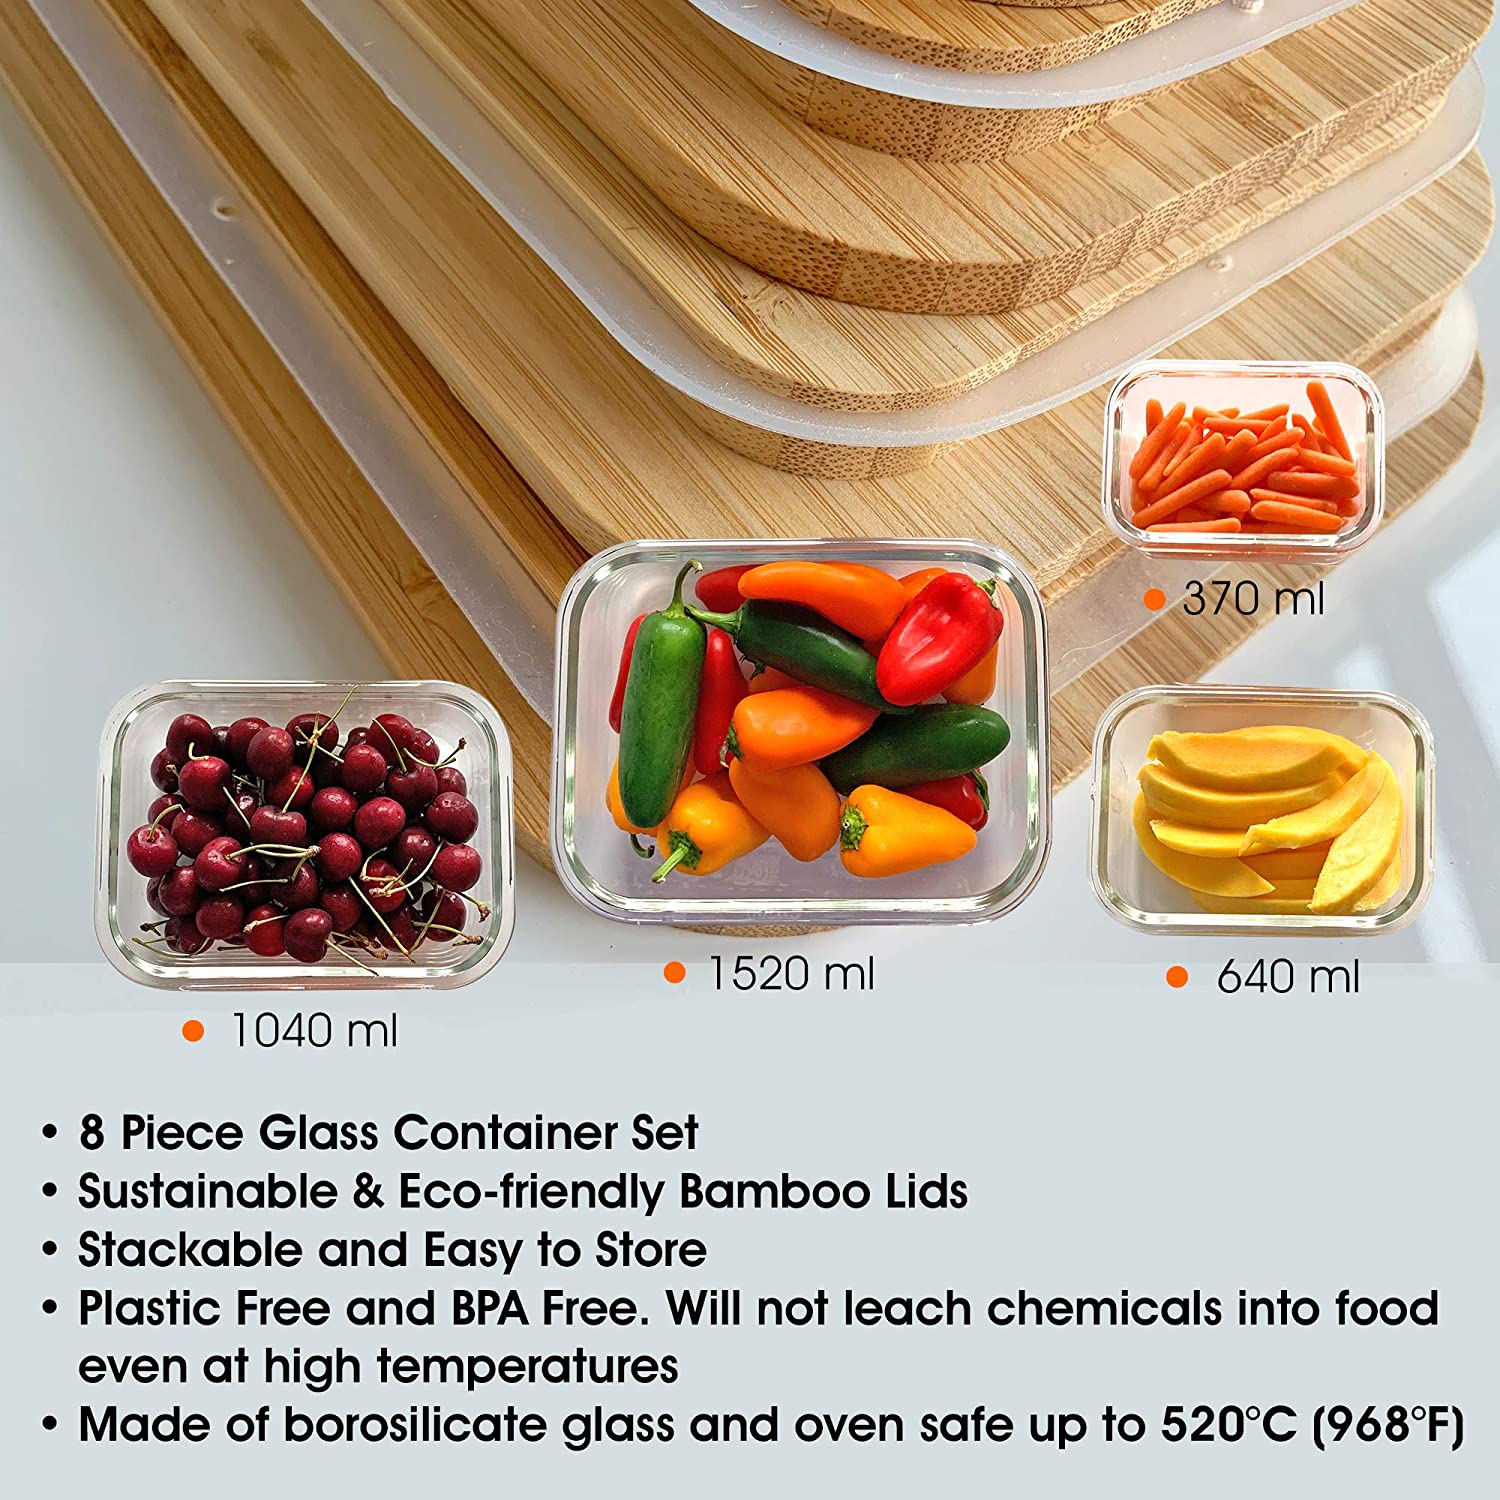 Glass Food Storage Containers with Bamboo Lids - 4 pc set - Vedessi